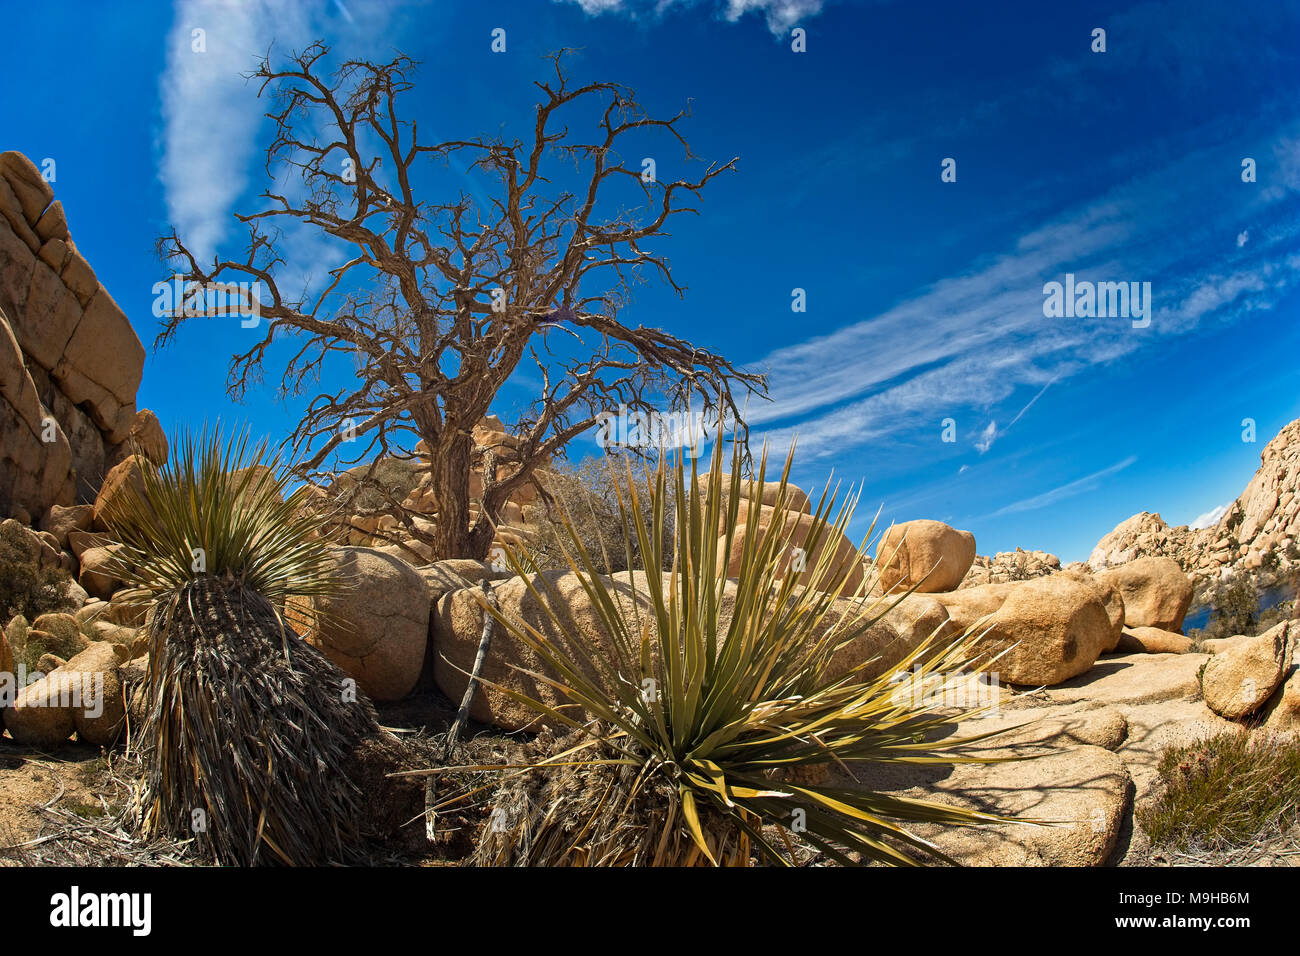 Desert landscape photographed in Joshua Tree National Park in Southern California's Mojave desert with a fisheye lens Stock Photo